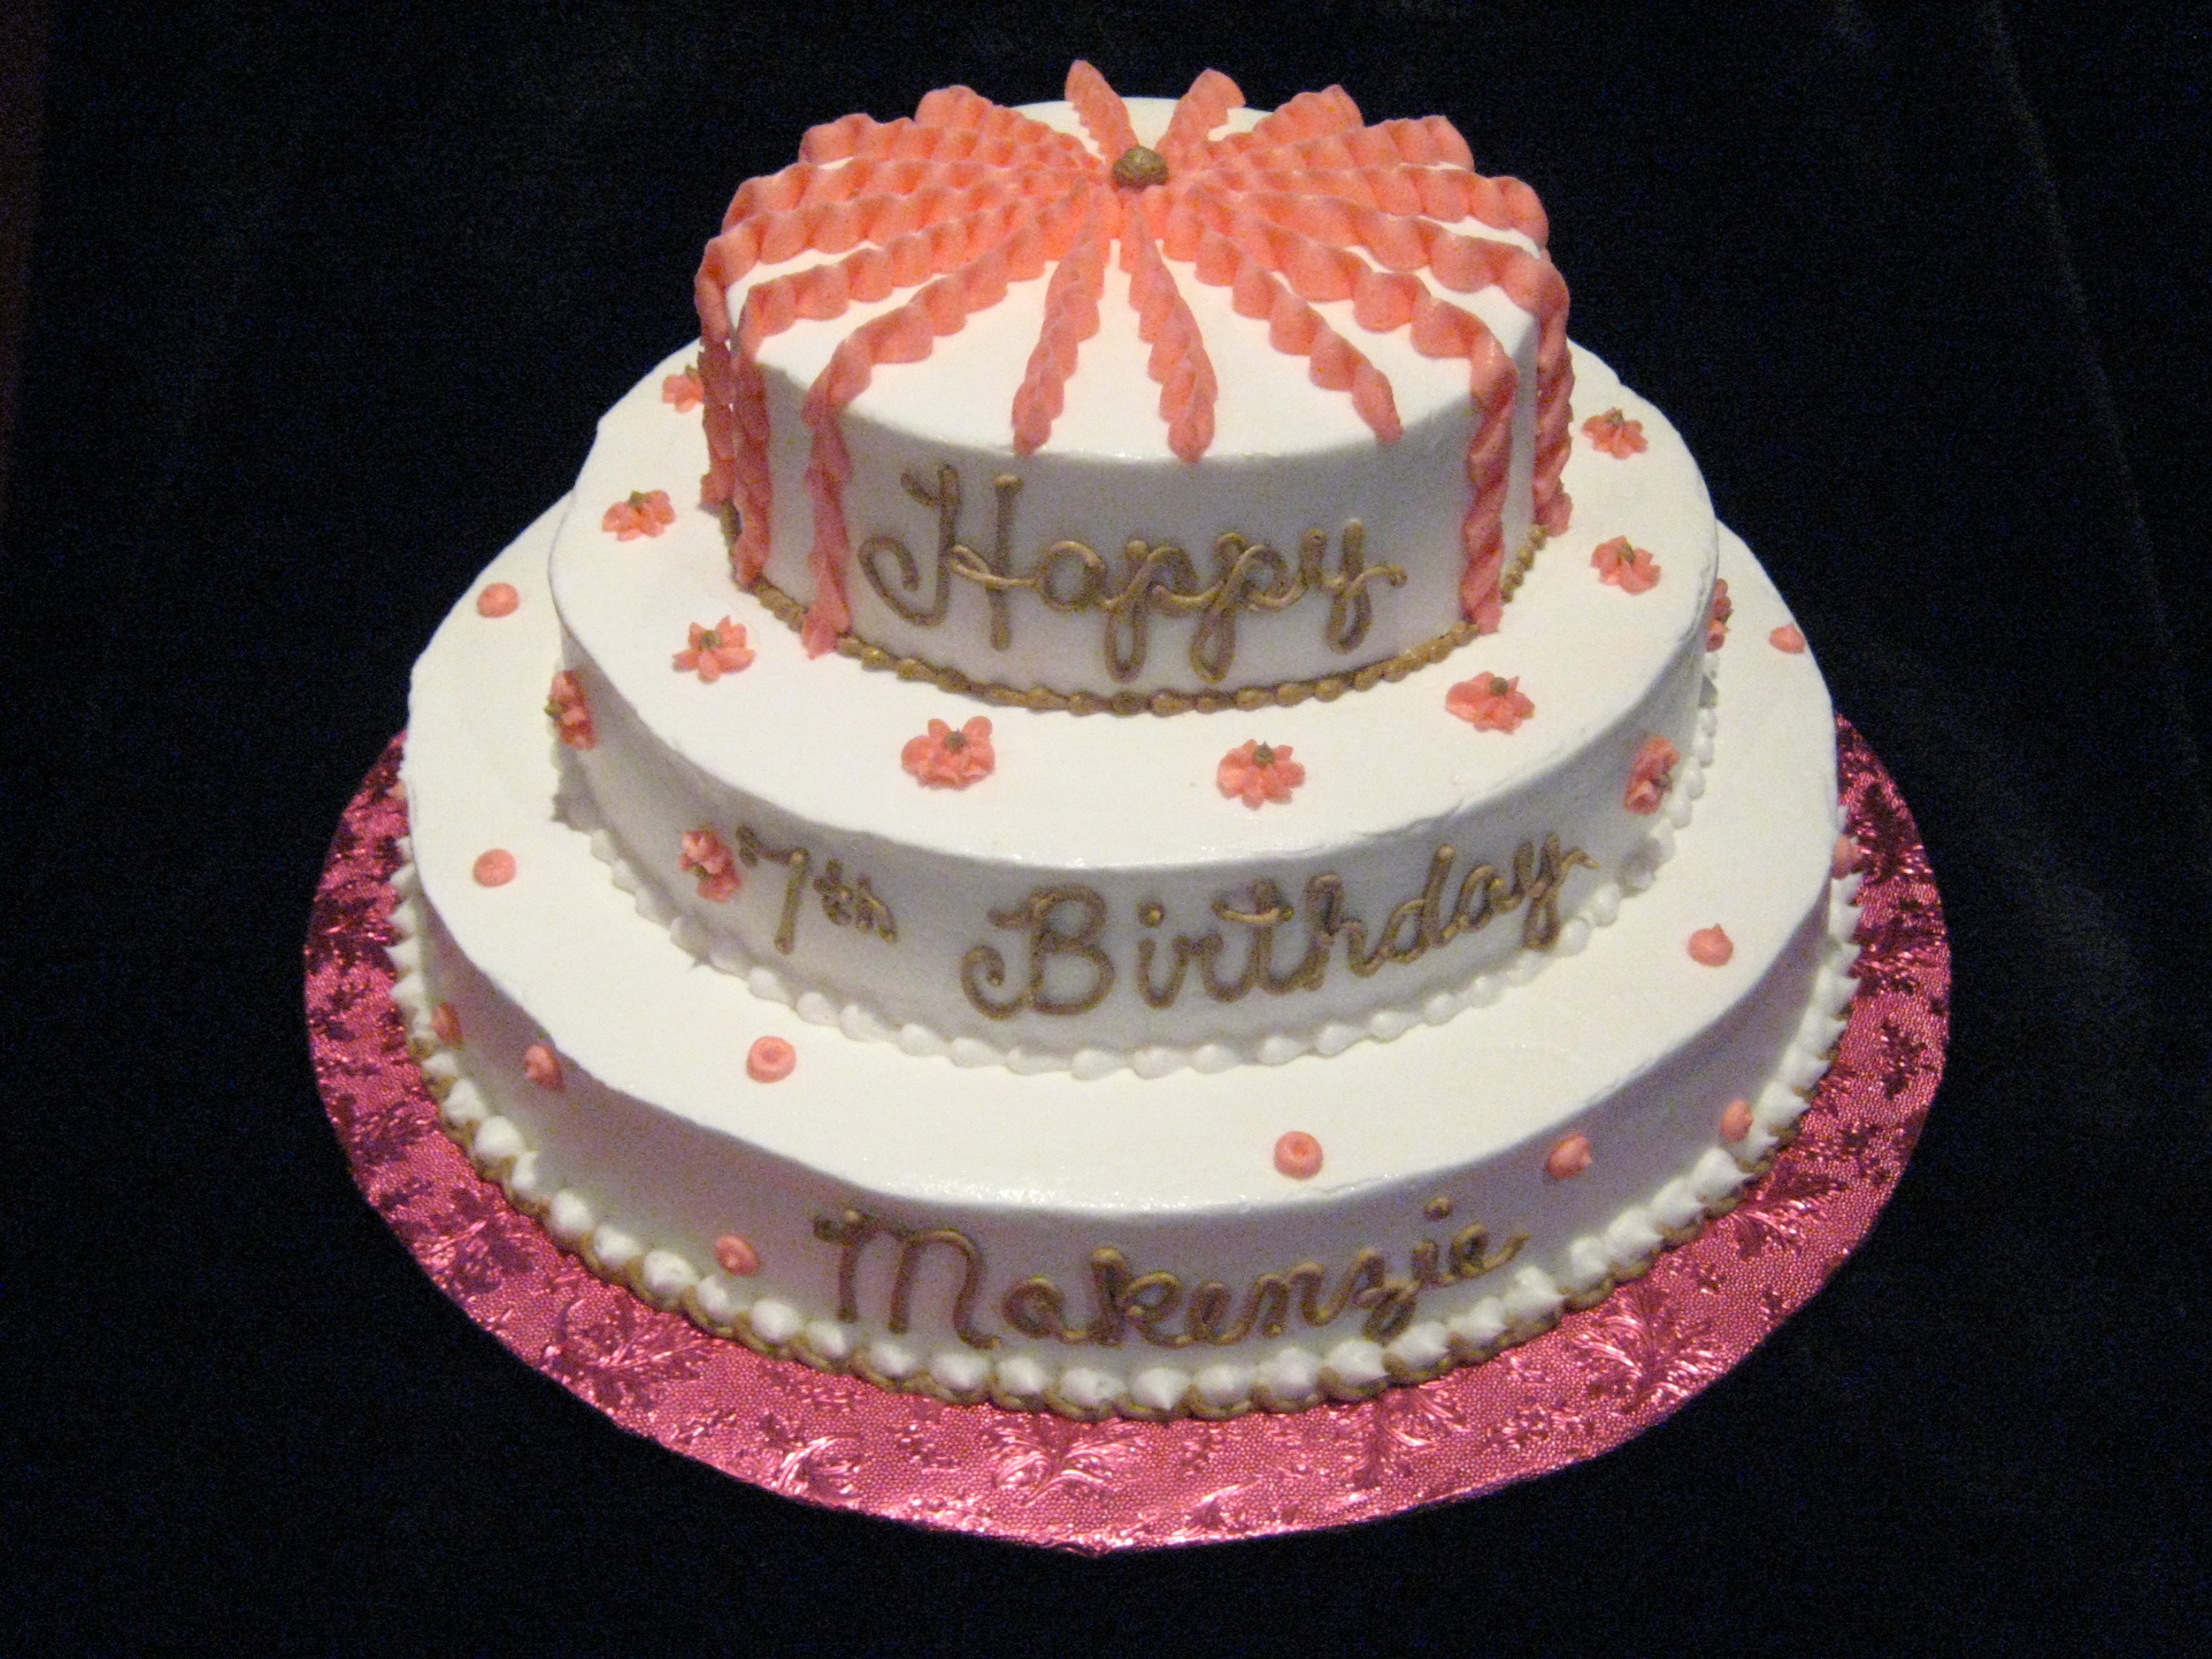 Birthday cake on black background wallpapers and images - wallpapers ...